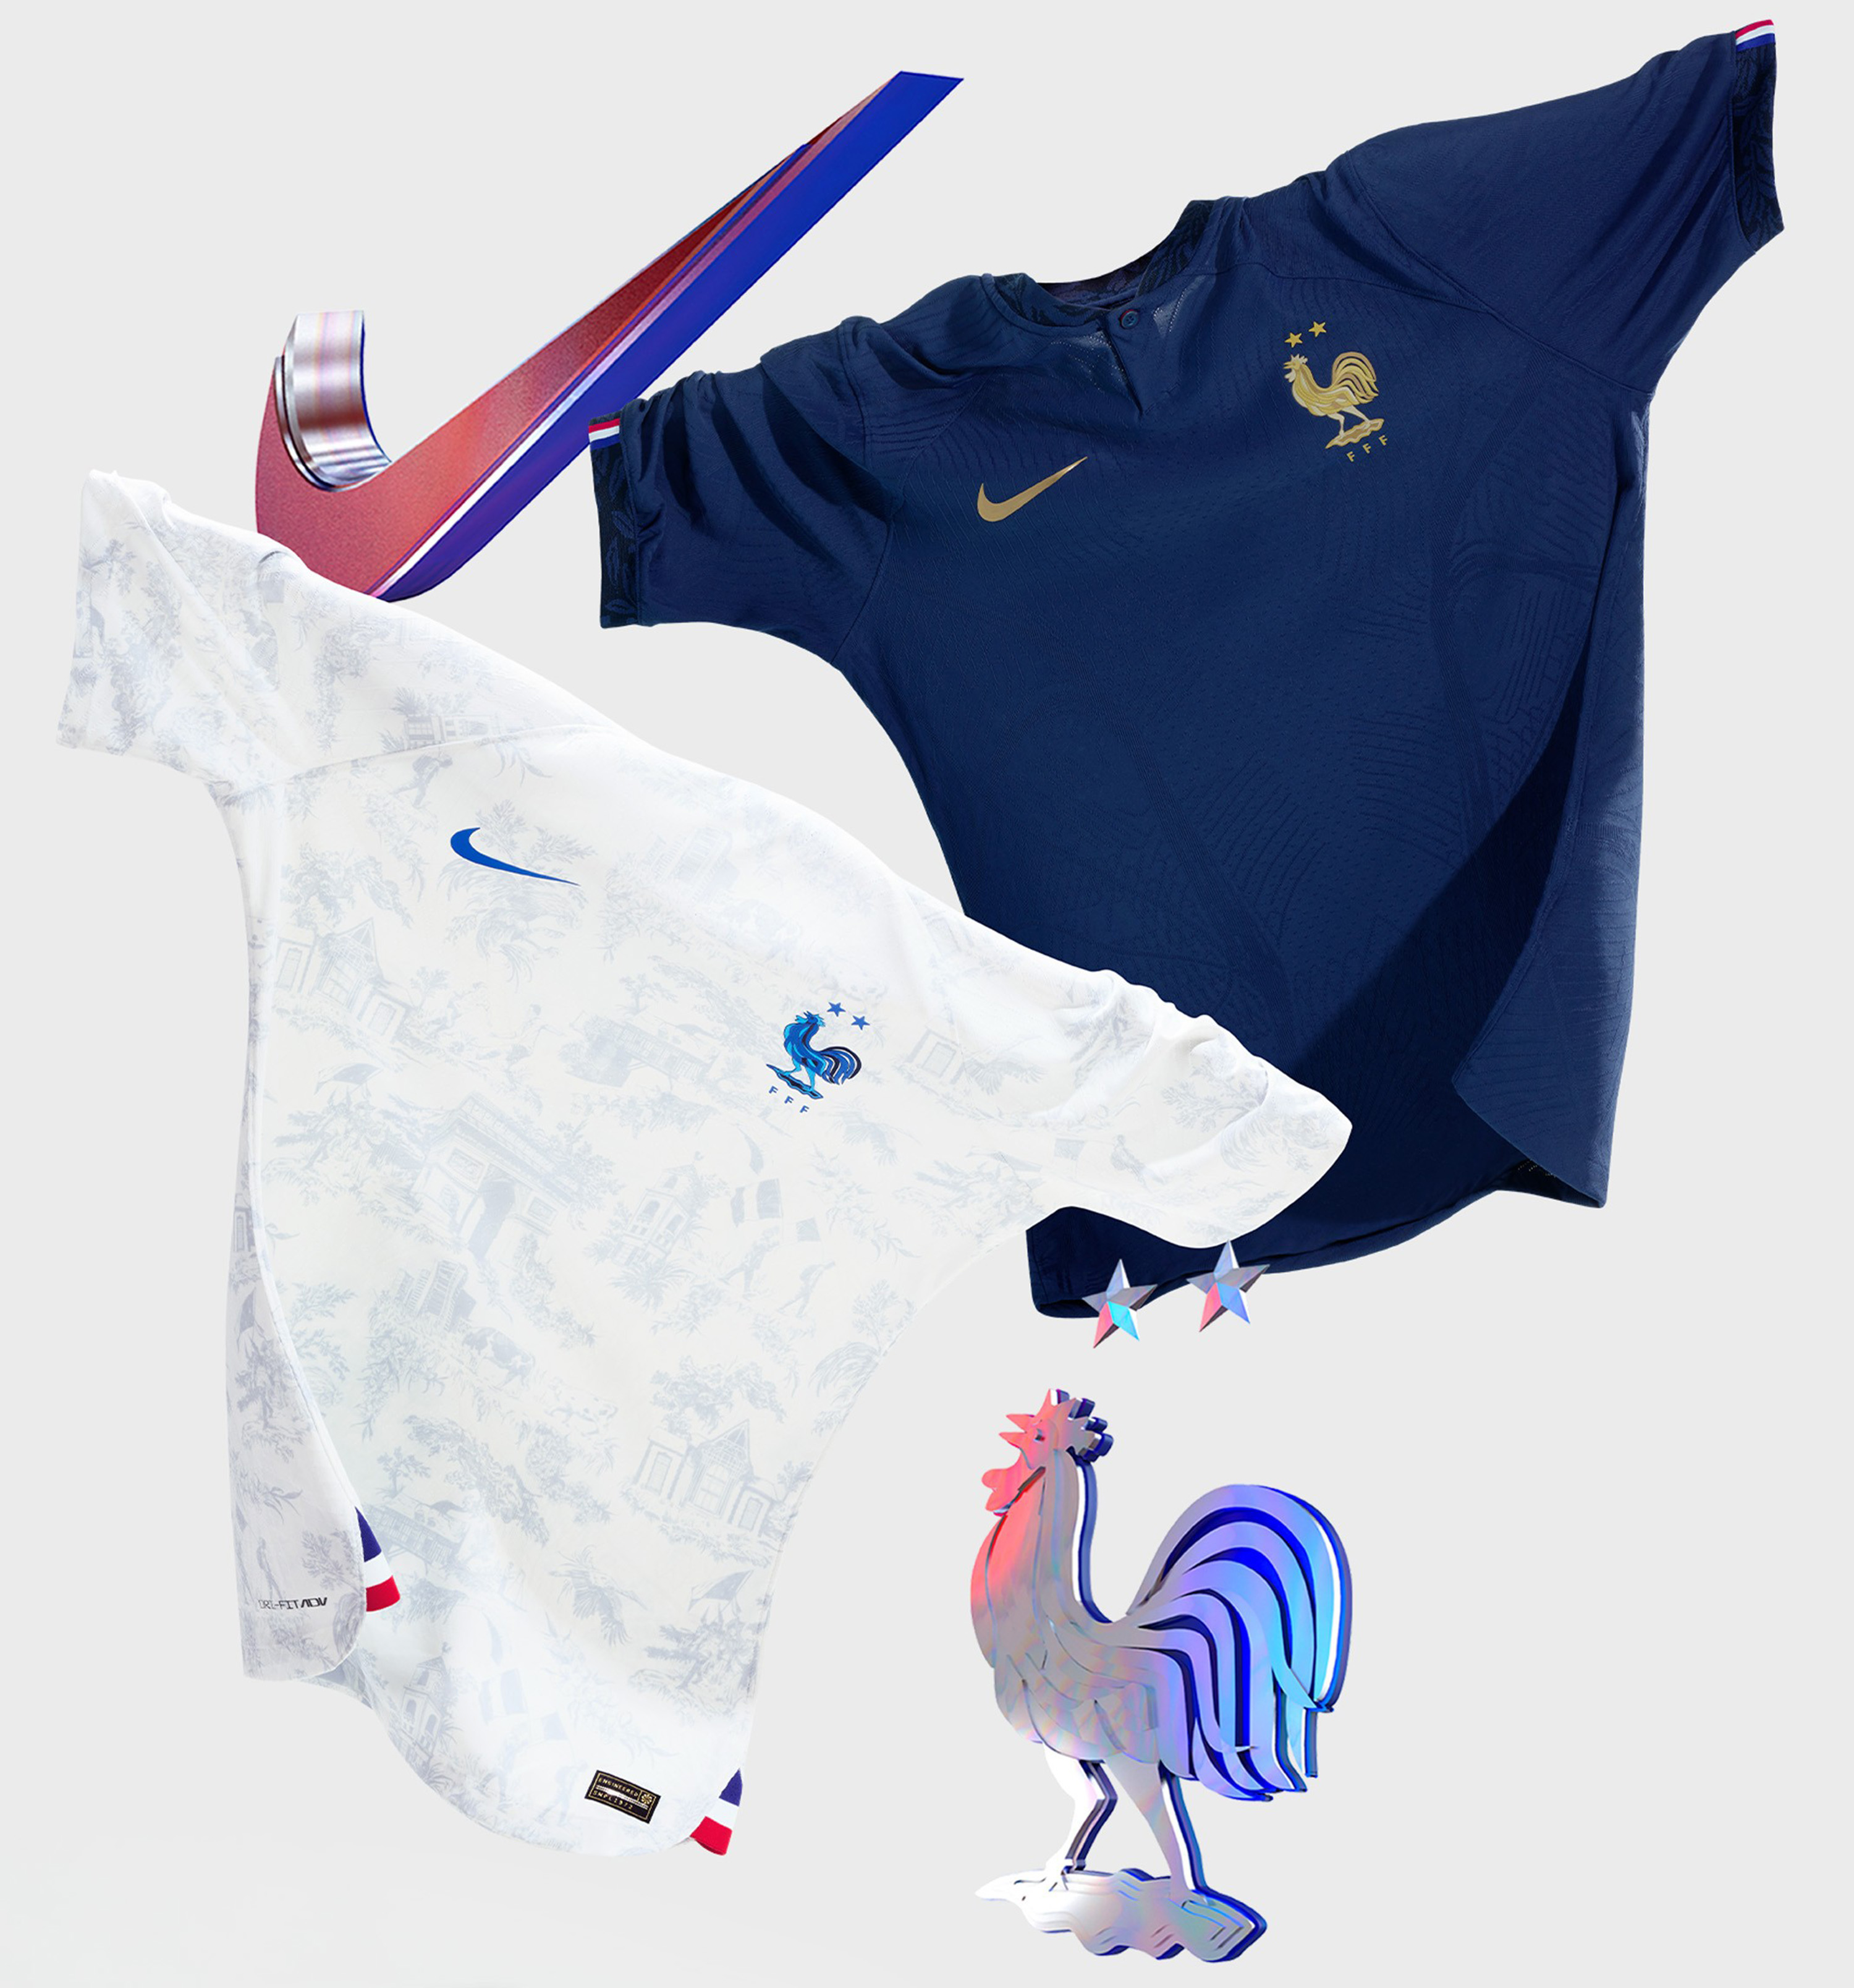 Nike's World Cup kits - United States, Netherlands miss the mark